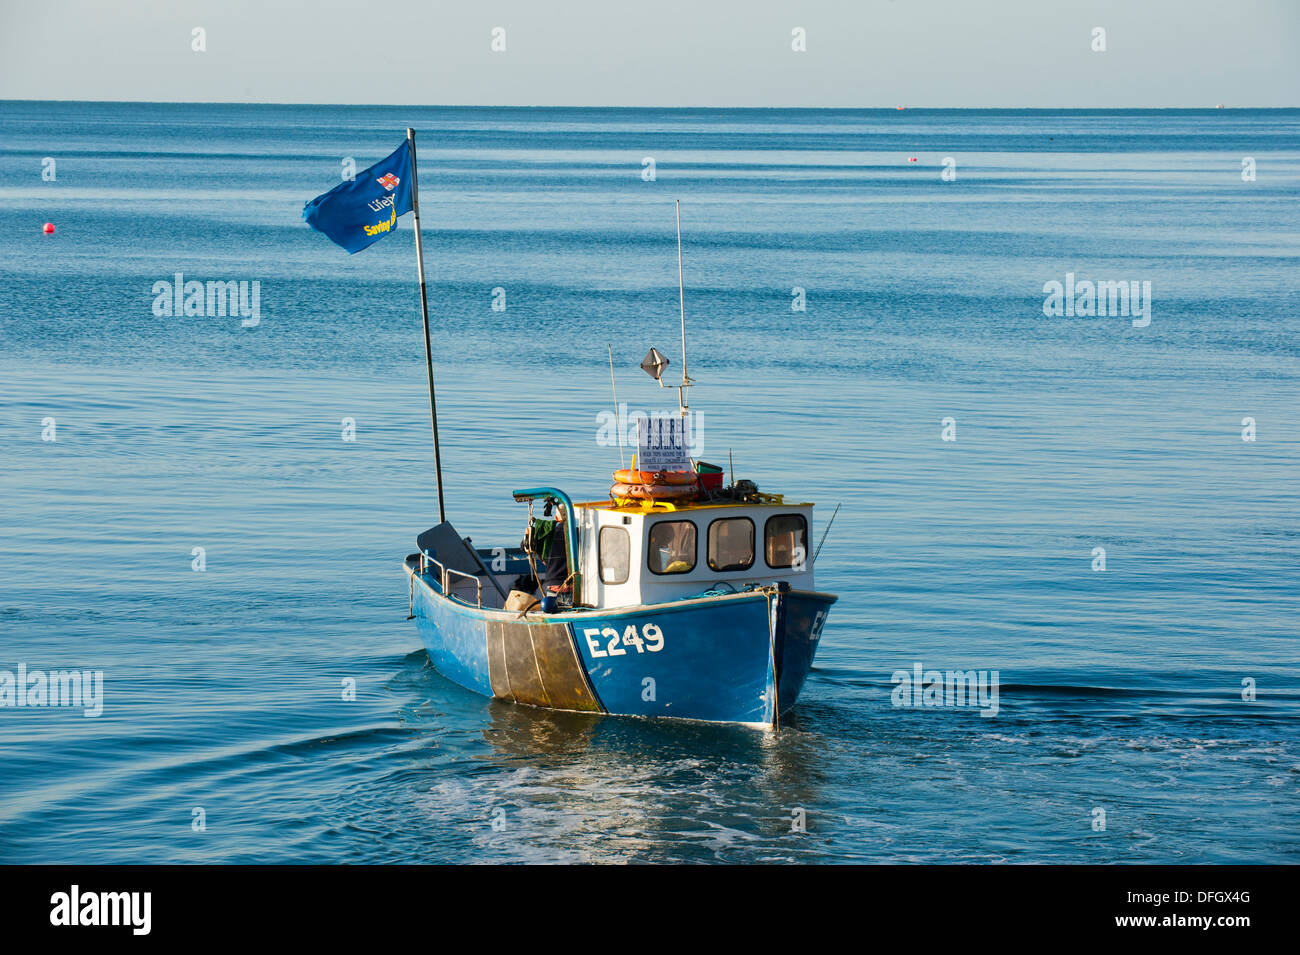 A boat on a fishing trip at Beer, Devon, England. Stock Photo